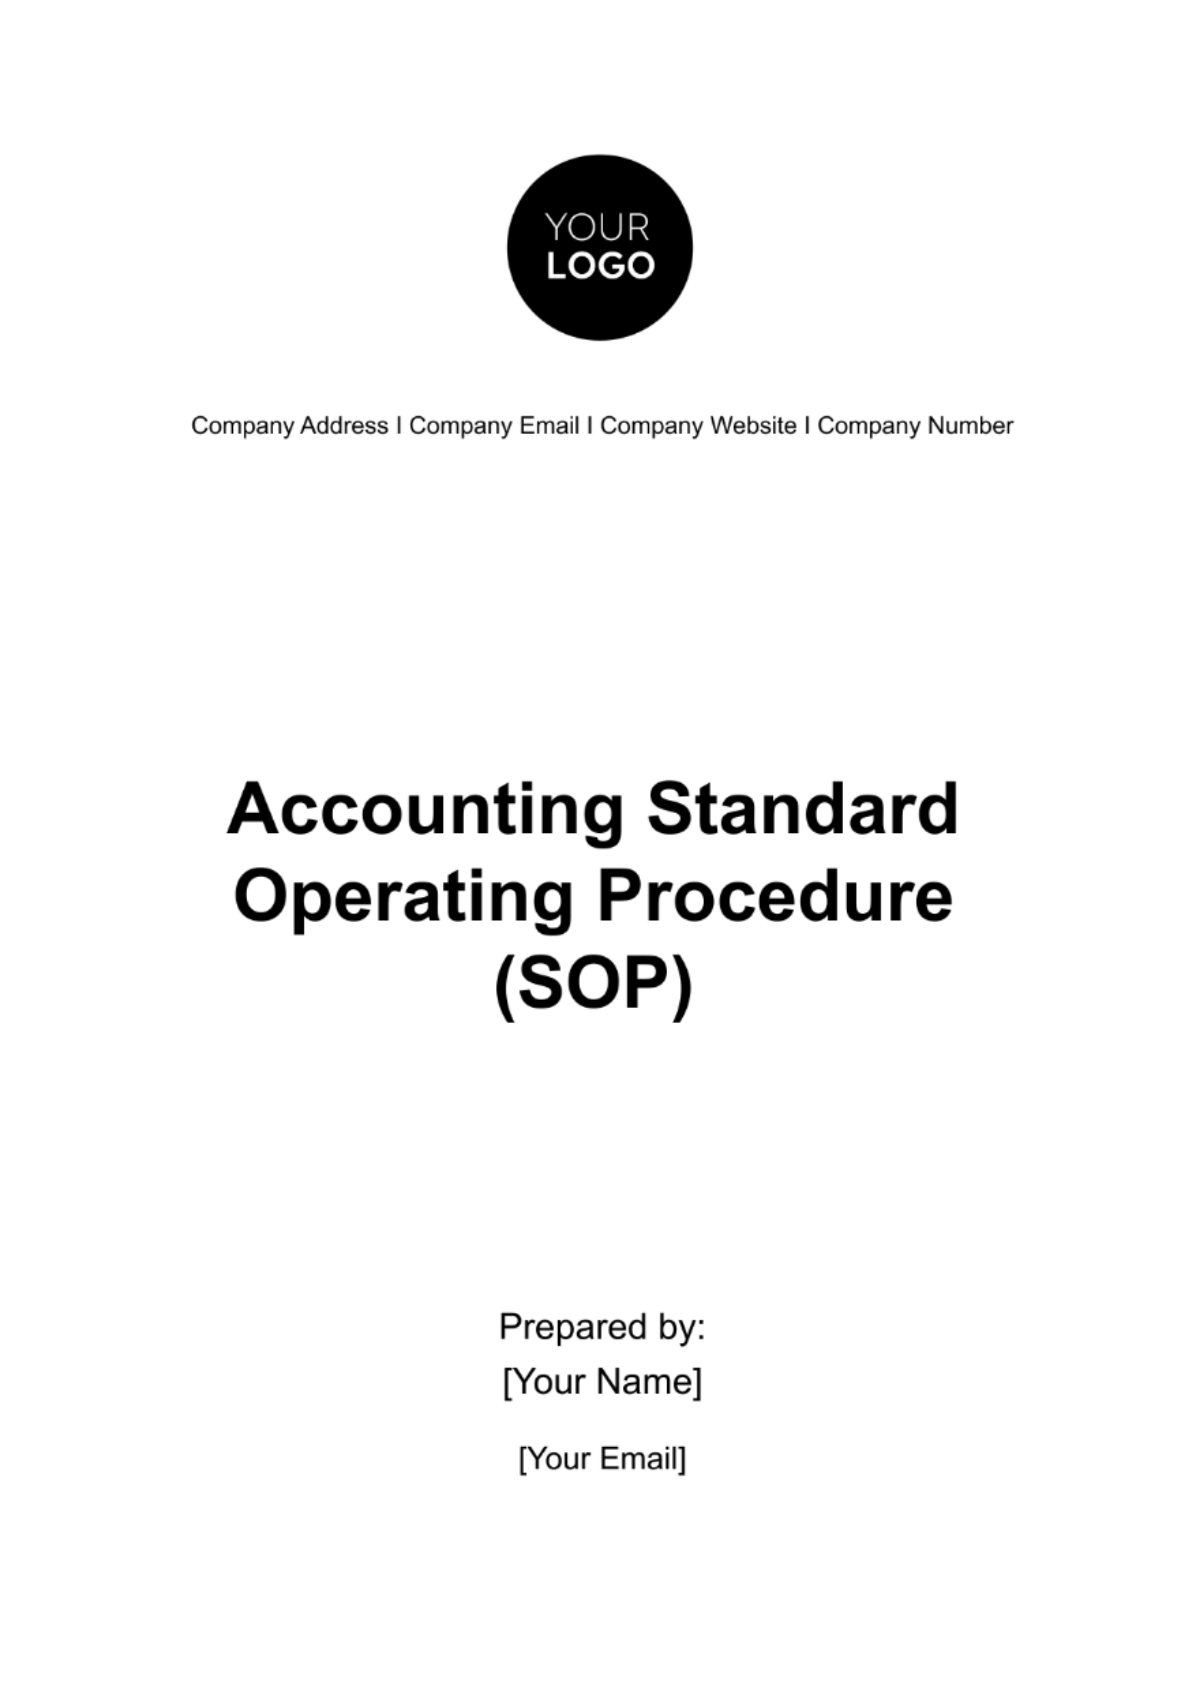 Free Accounting Standard Operating Procedure (SOP) Template